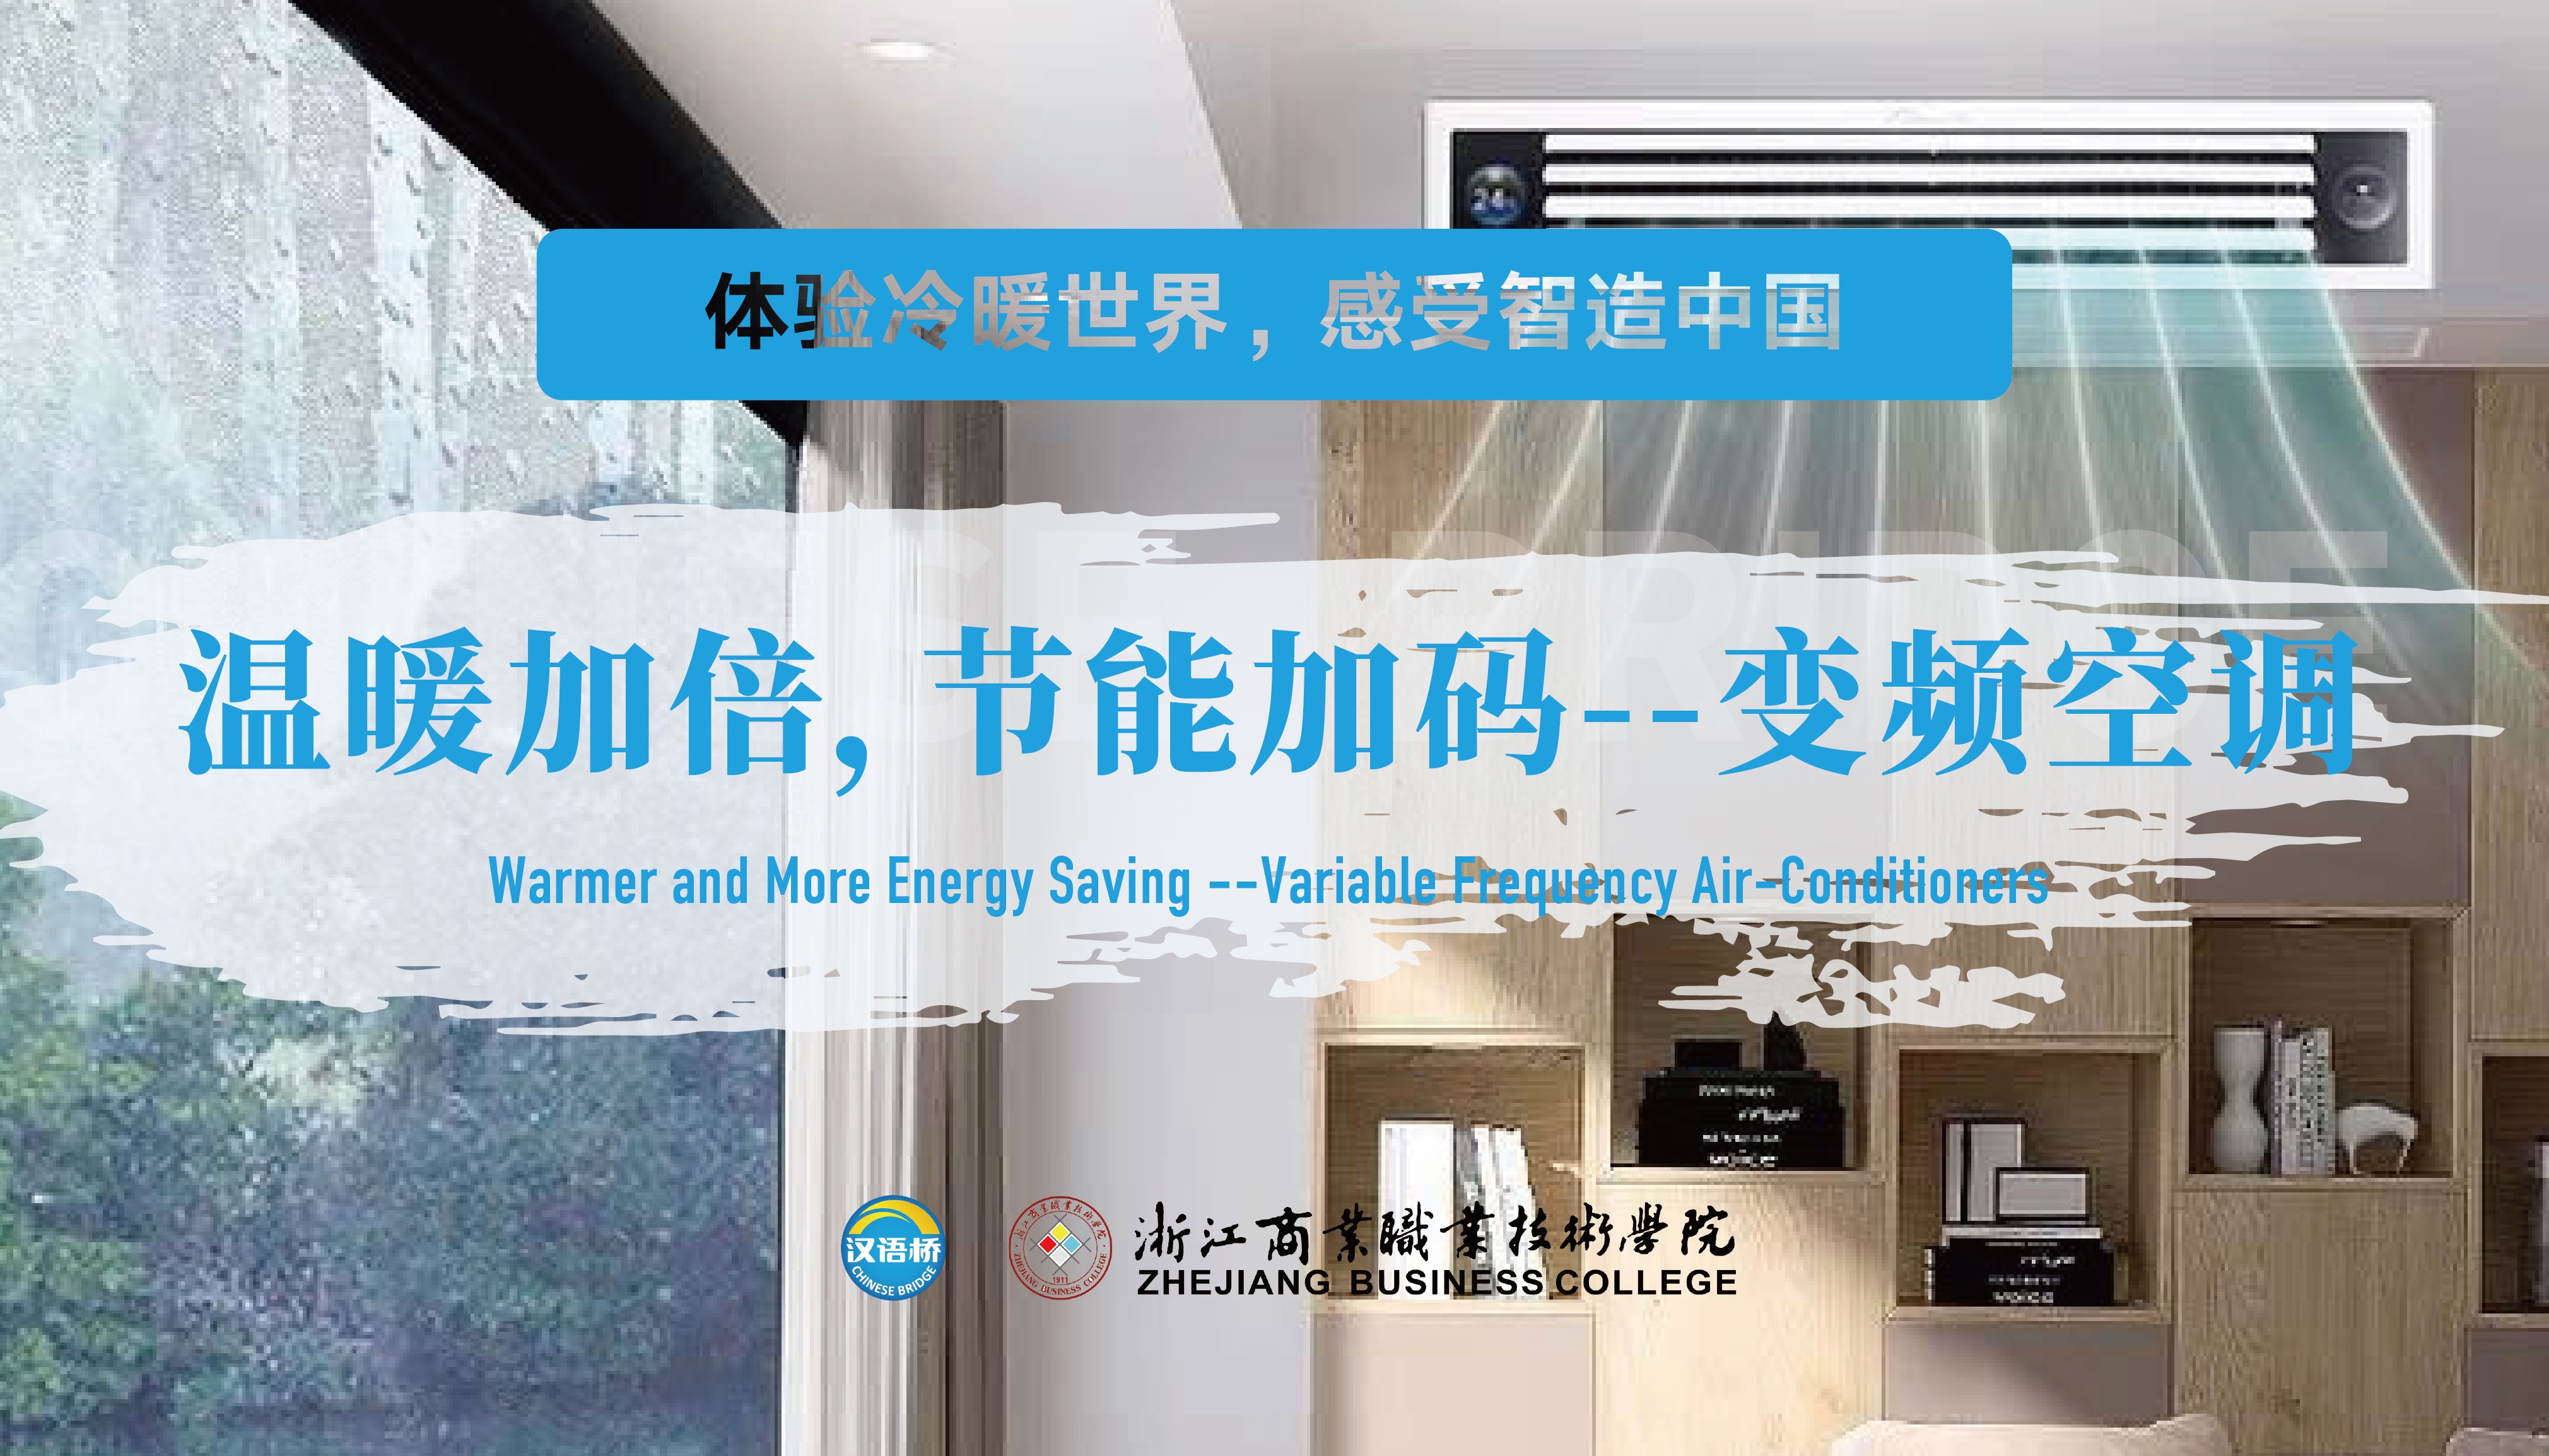 Warmer and More Energy Saving --Variable Frequency